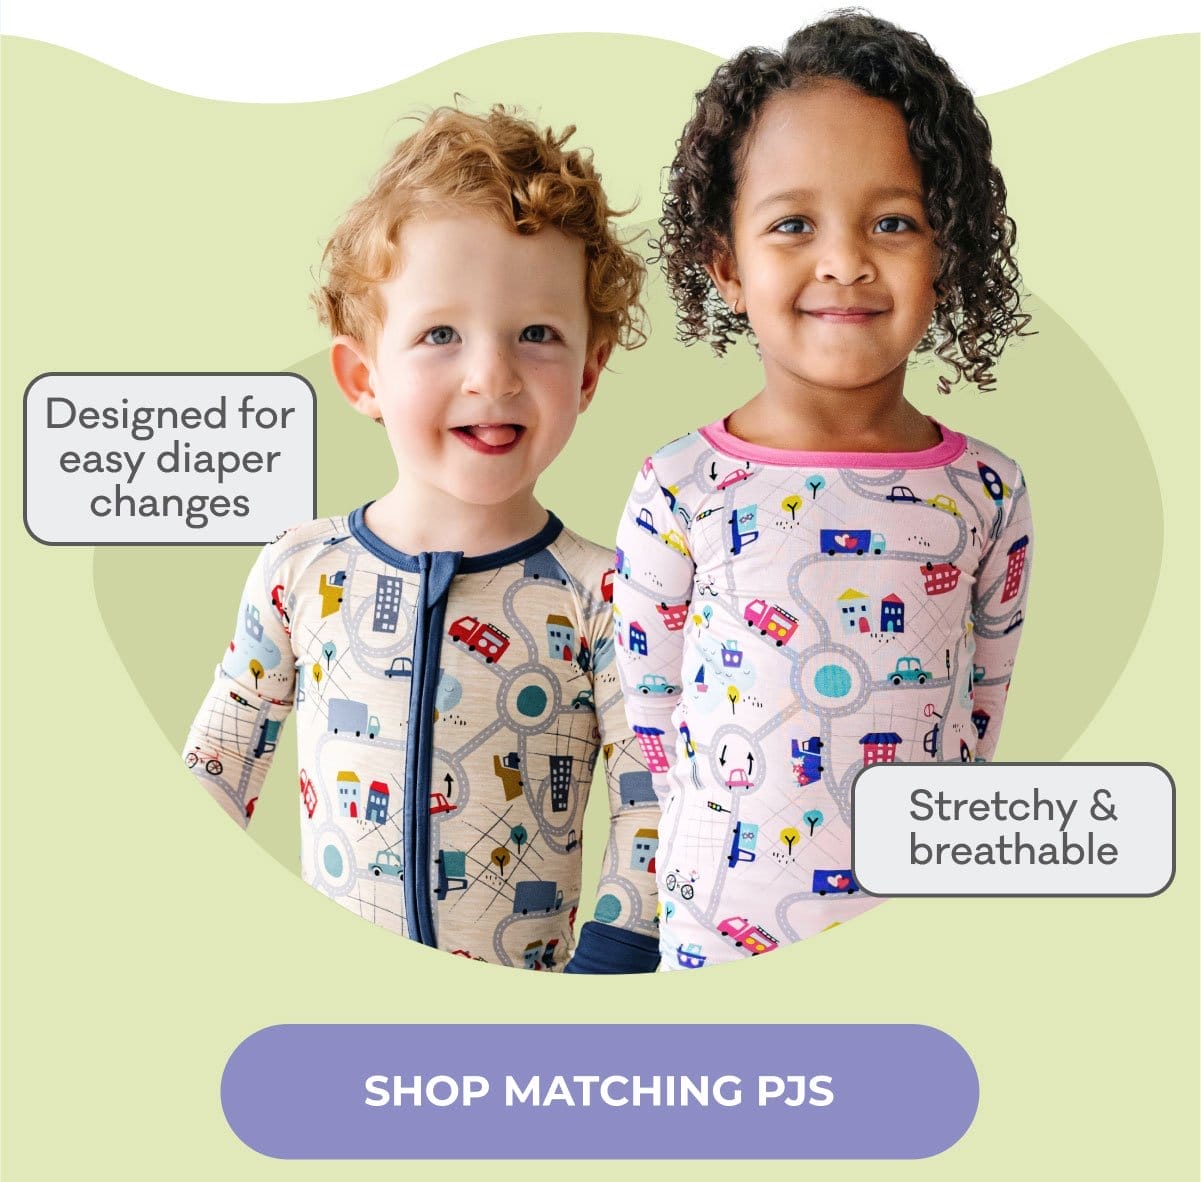 Designed for easy diaper changes | Stretchy & breathable | SHOP MATCHING PJS